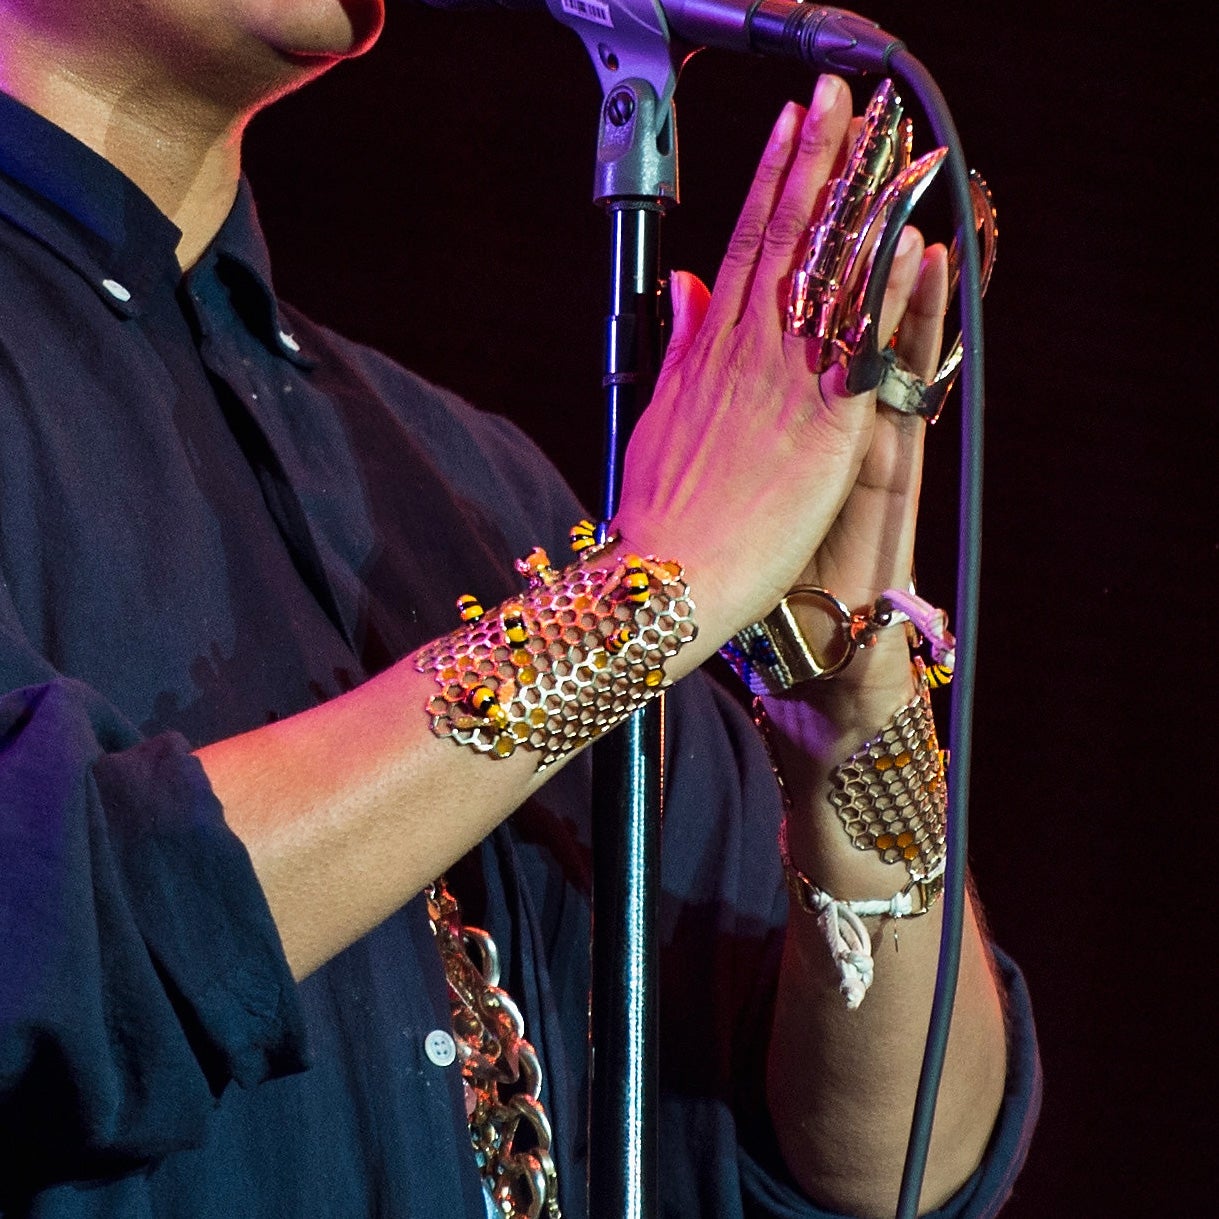 Erykah Badu's Arm Party Game Is Serious
